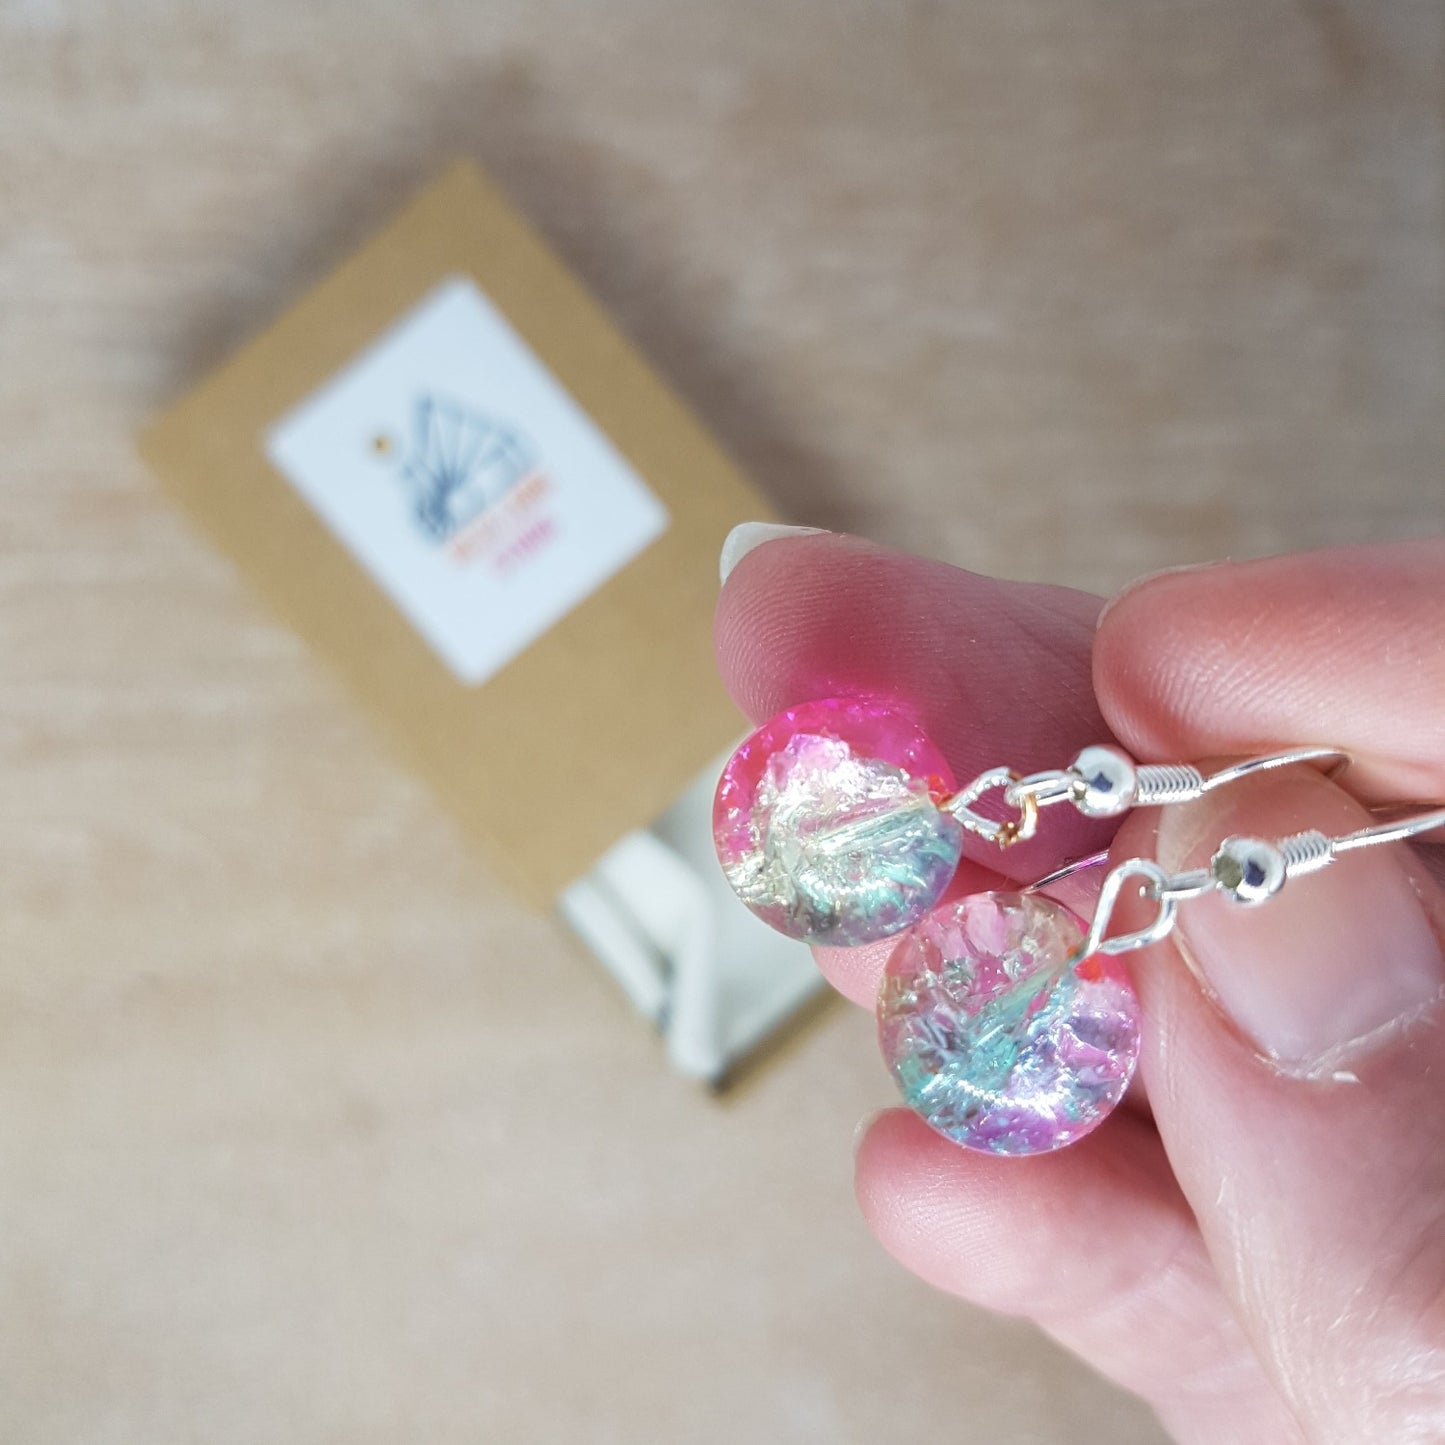 Hand holding pink sparkly glass bead drop earrings up to the camera. Brown craft card gift box can be seen on the desk below.